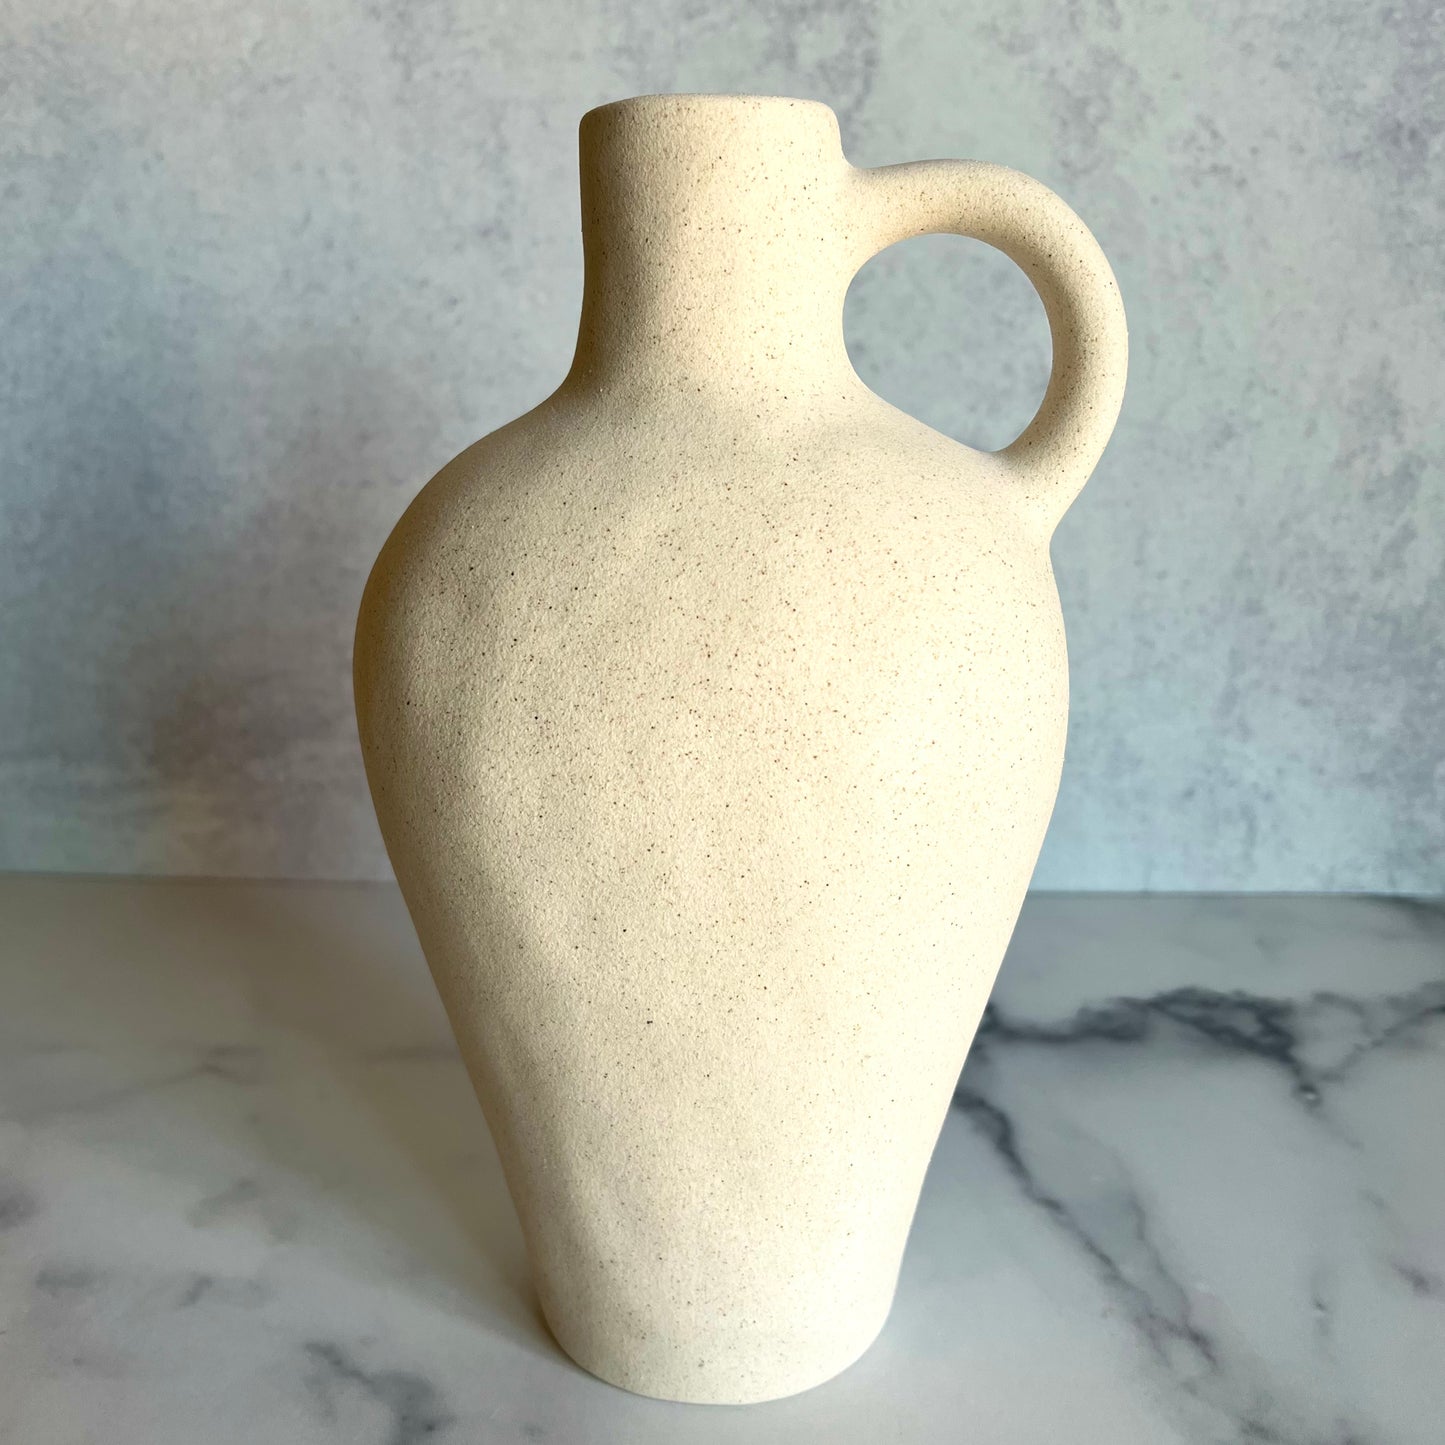 A beige vase with a small handle against a light gray background